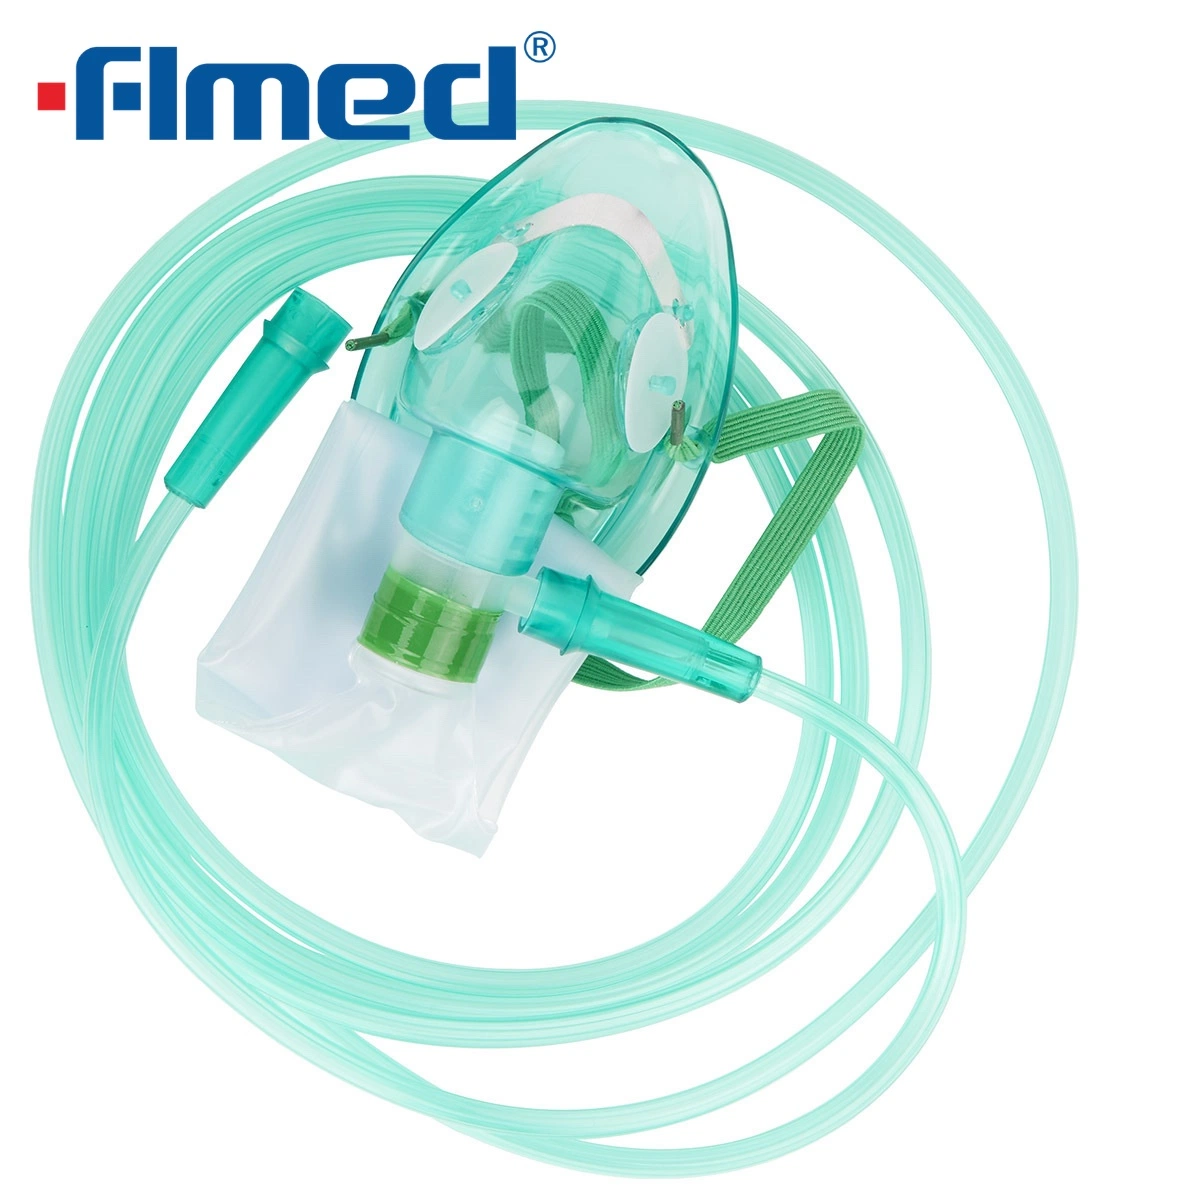 Medical Sterile Disposable Adult Children PVC Non-Rebreather Oxygen Mask with Tubing